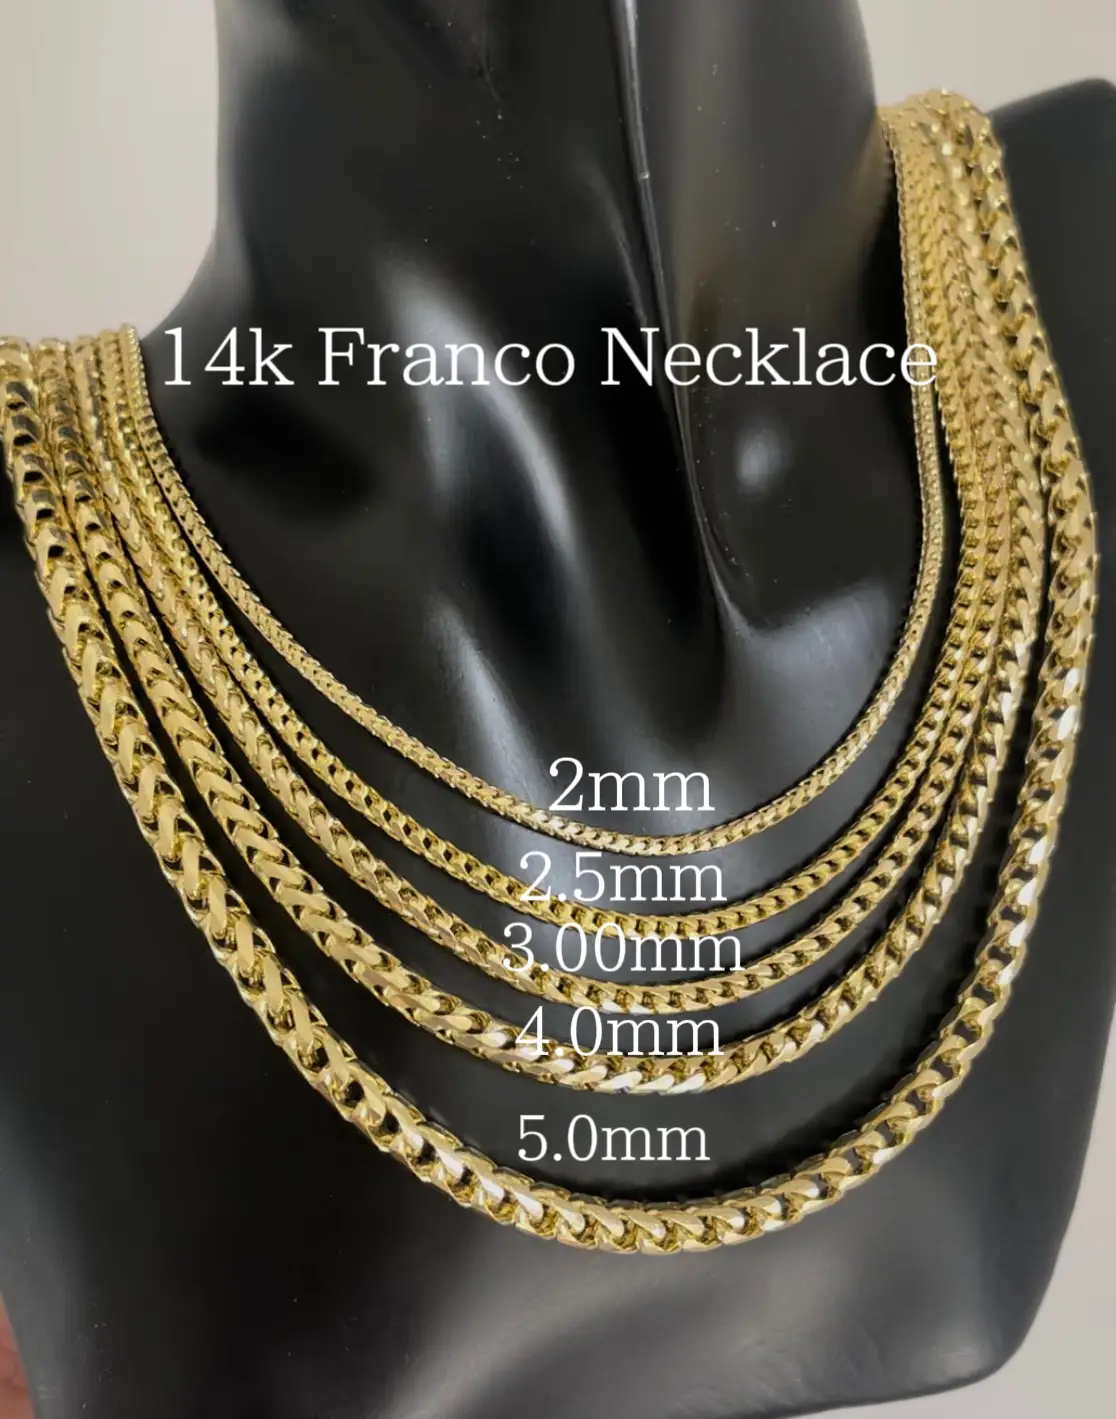 Accessories, 14k Gold Layered 22in 5mm Rope Chain Necklace